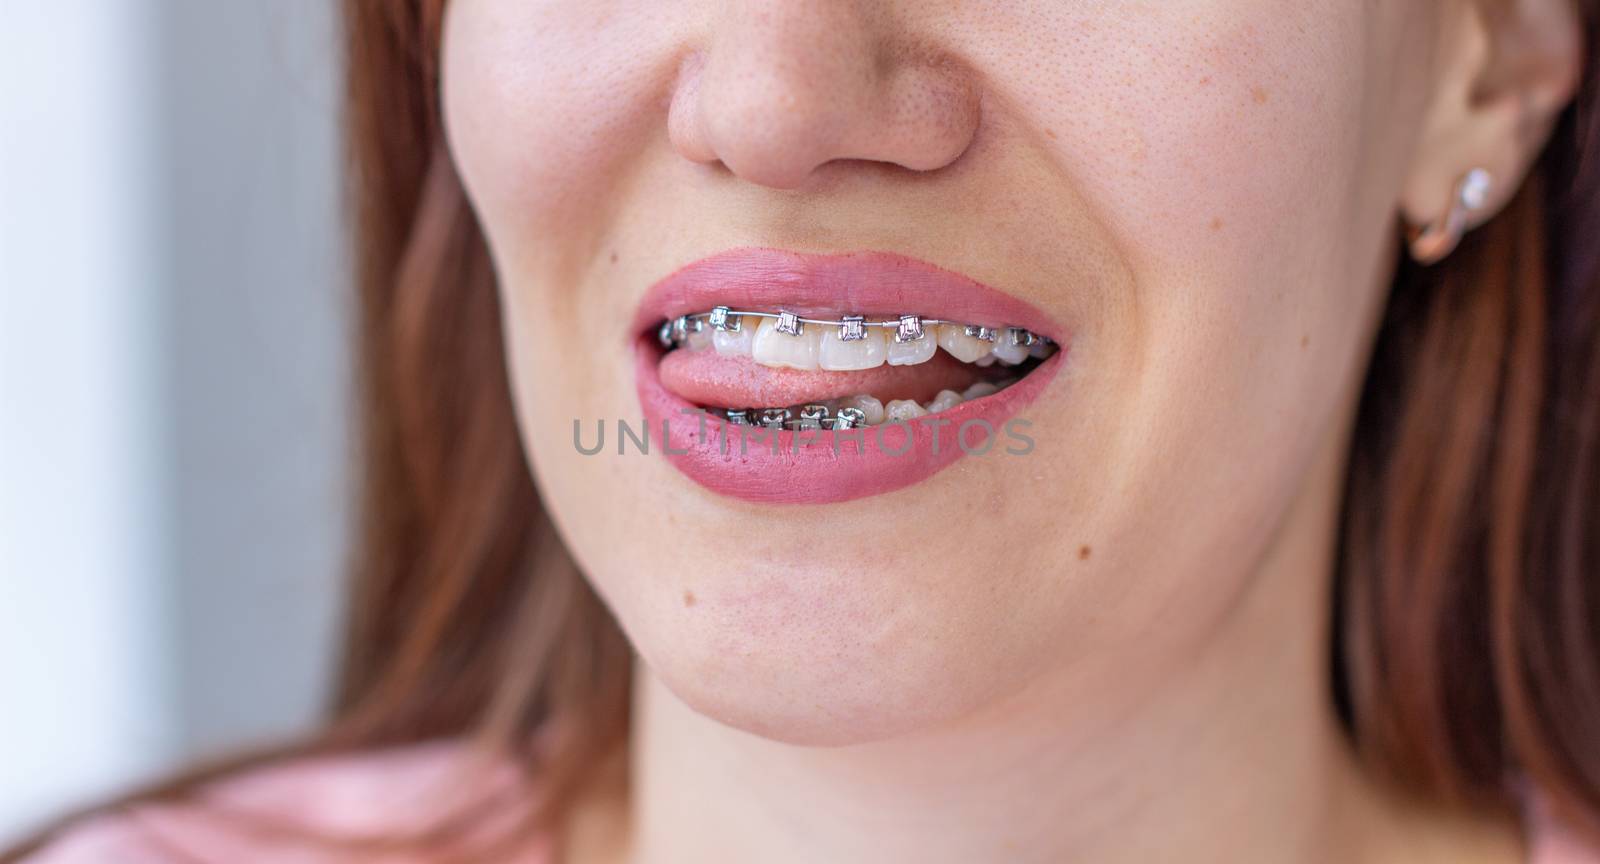 Brace system in a girl's smiling mouth, macro photography of teeth, close-up of lips. The girl stuck out her tongue